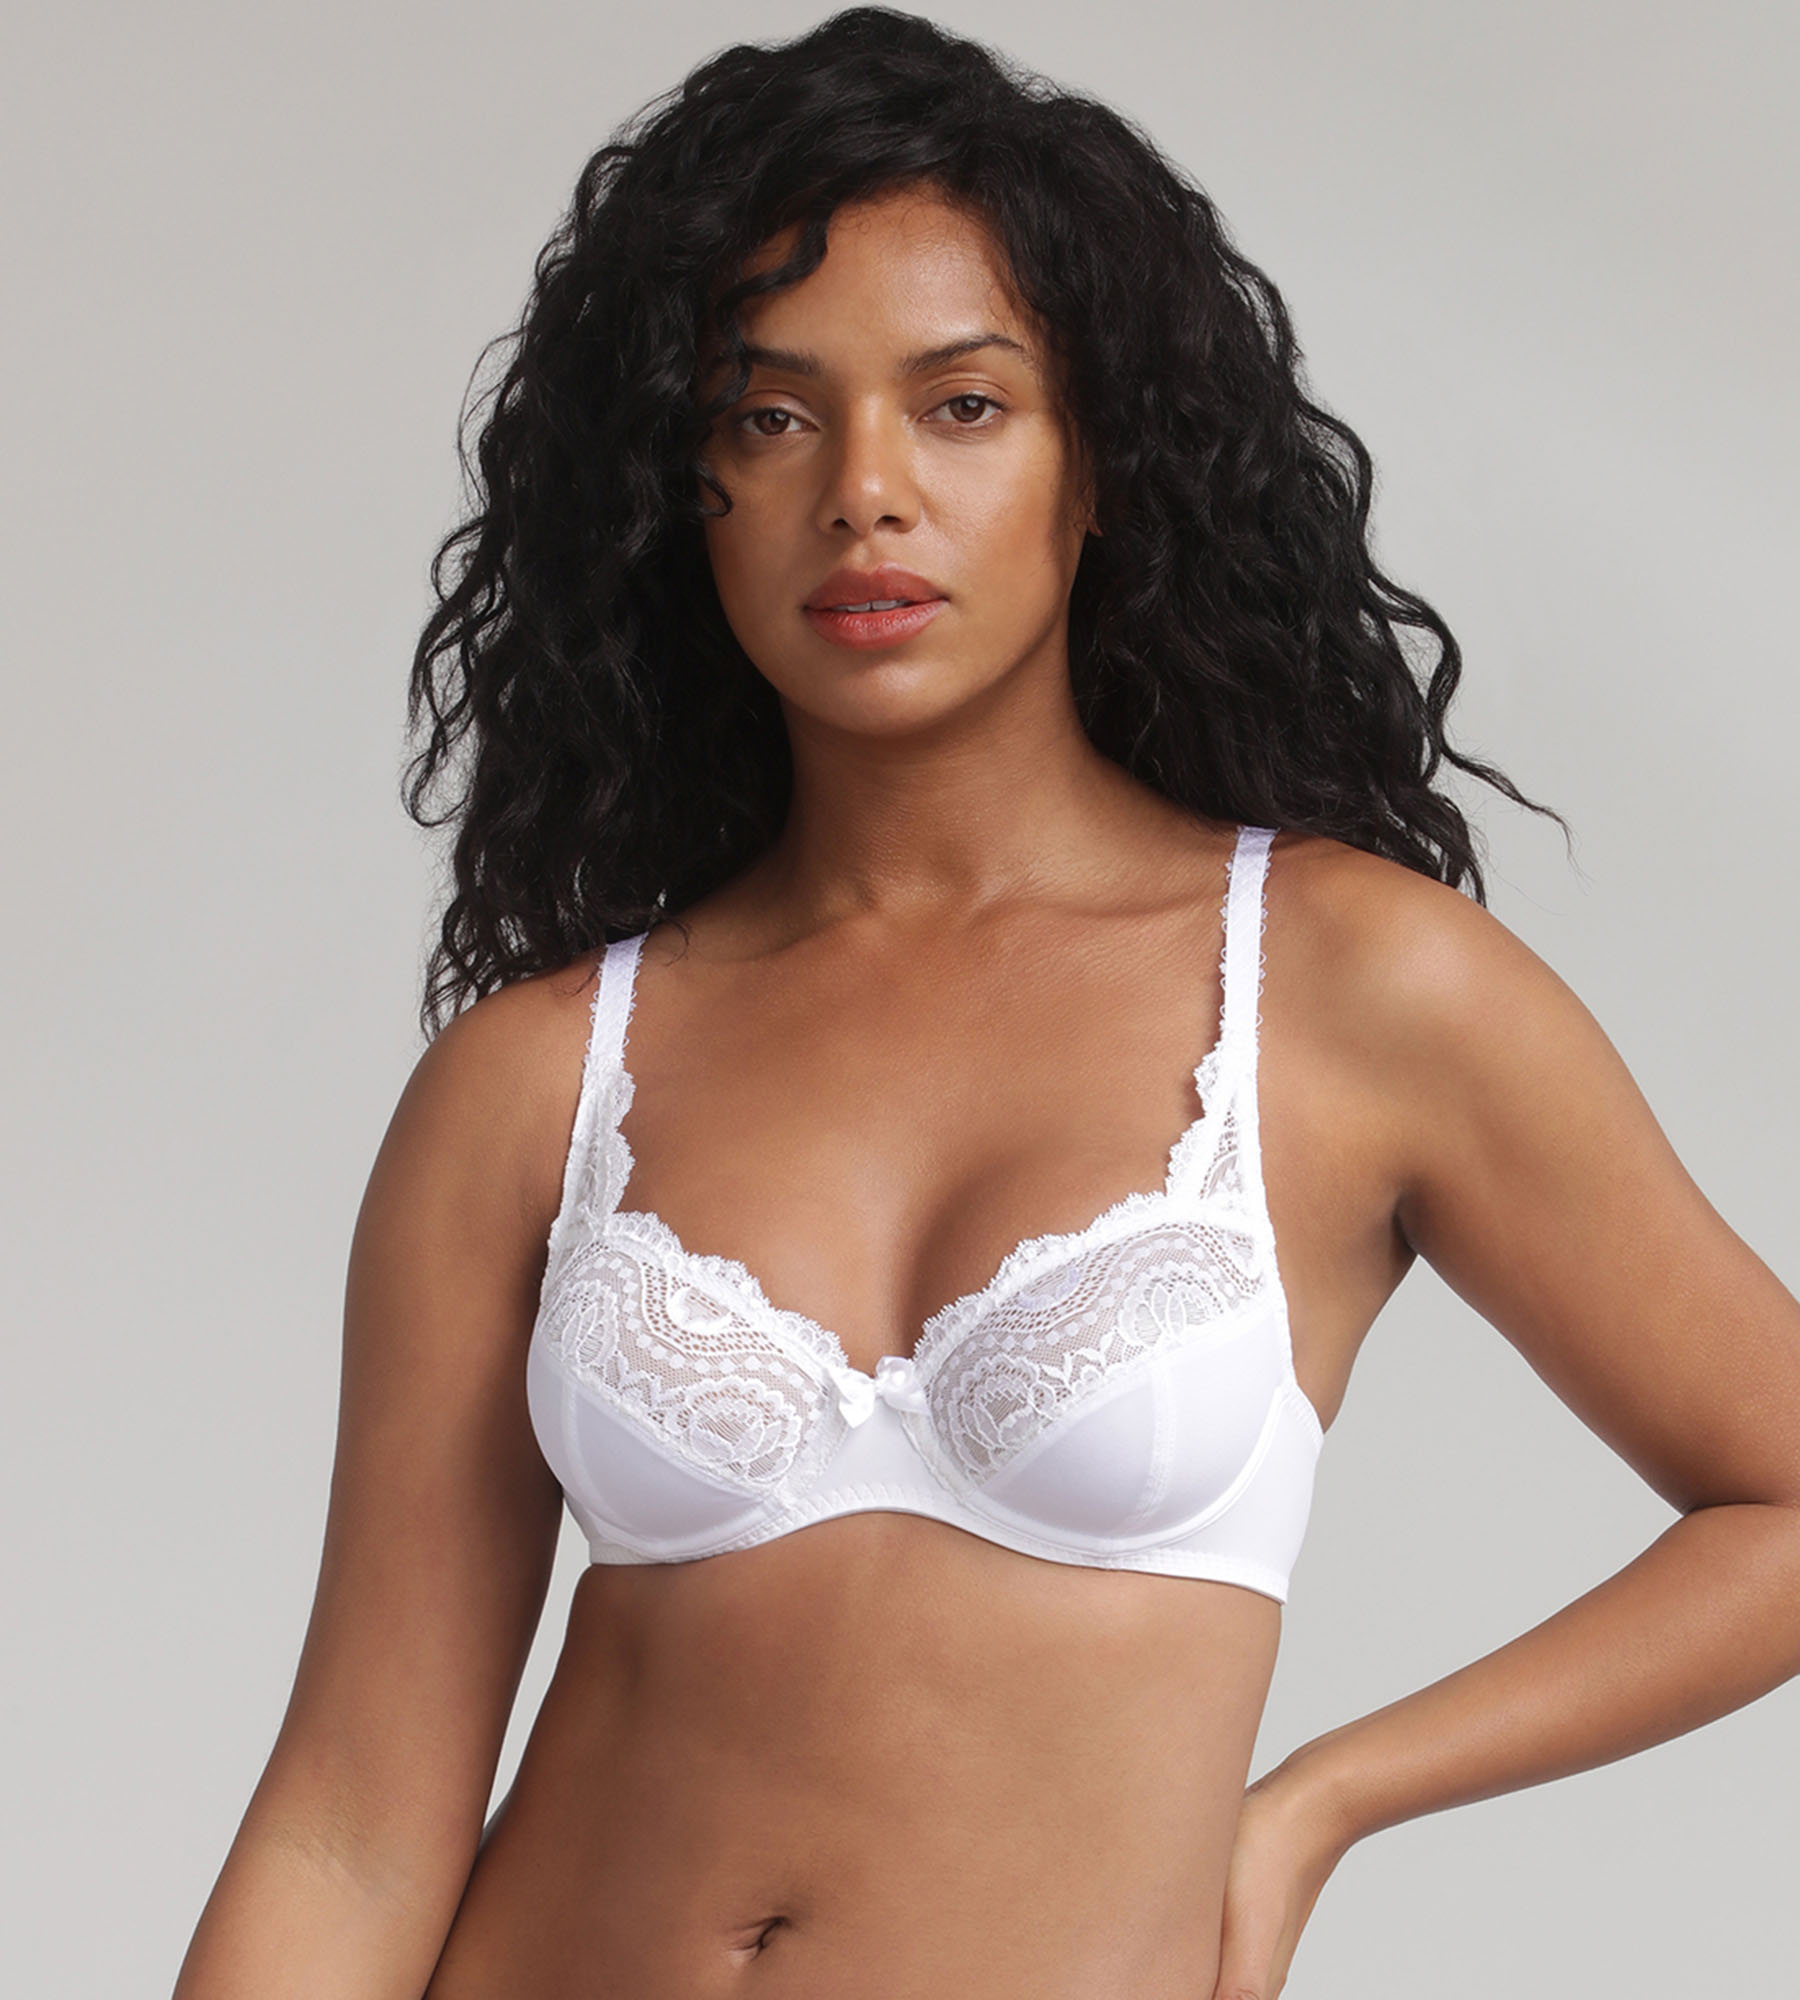 75 NBB Turkish decollete high quality white bra with removable